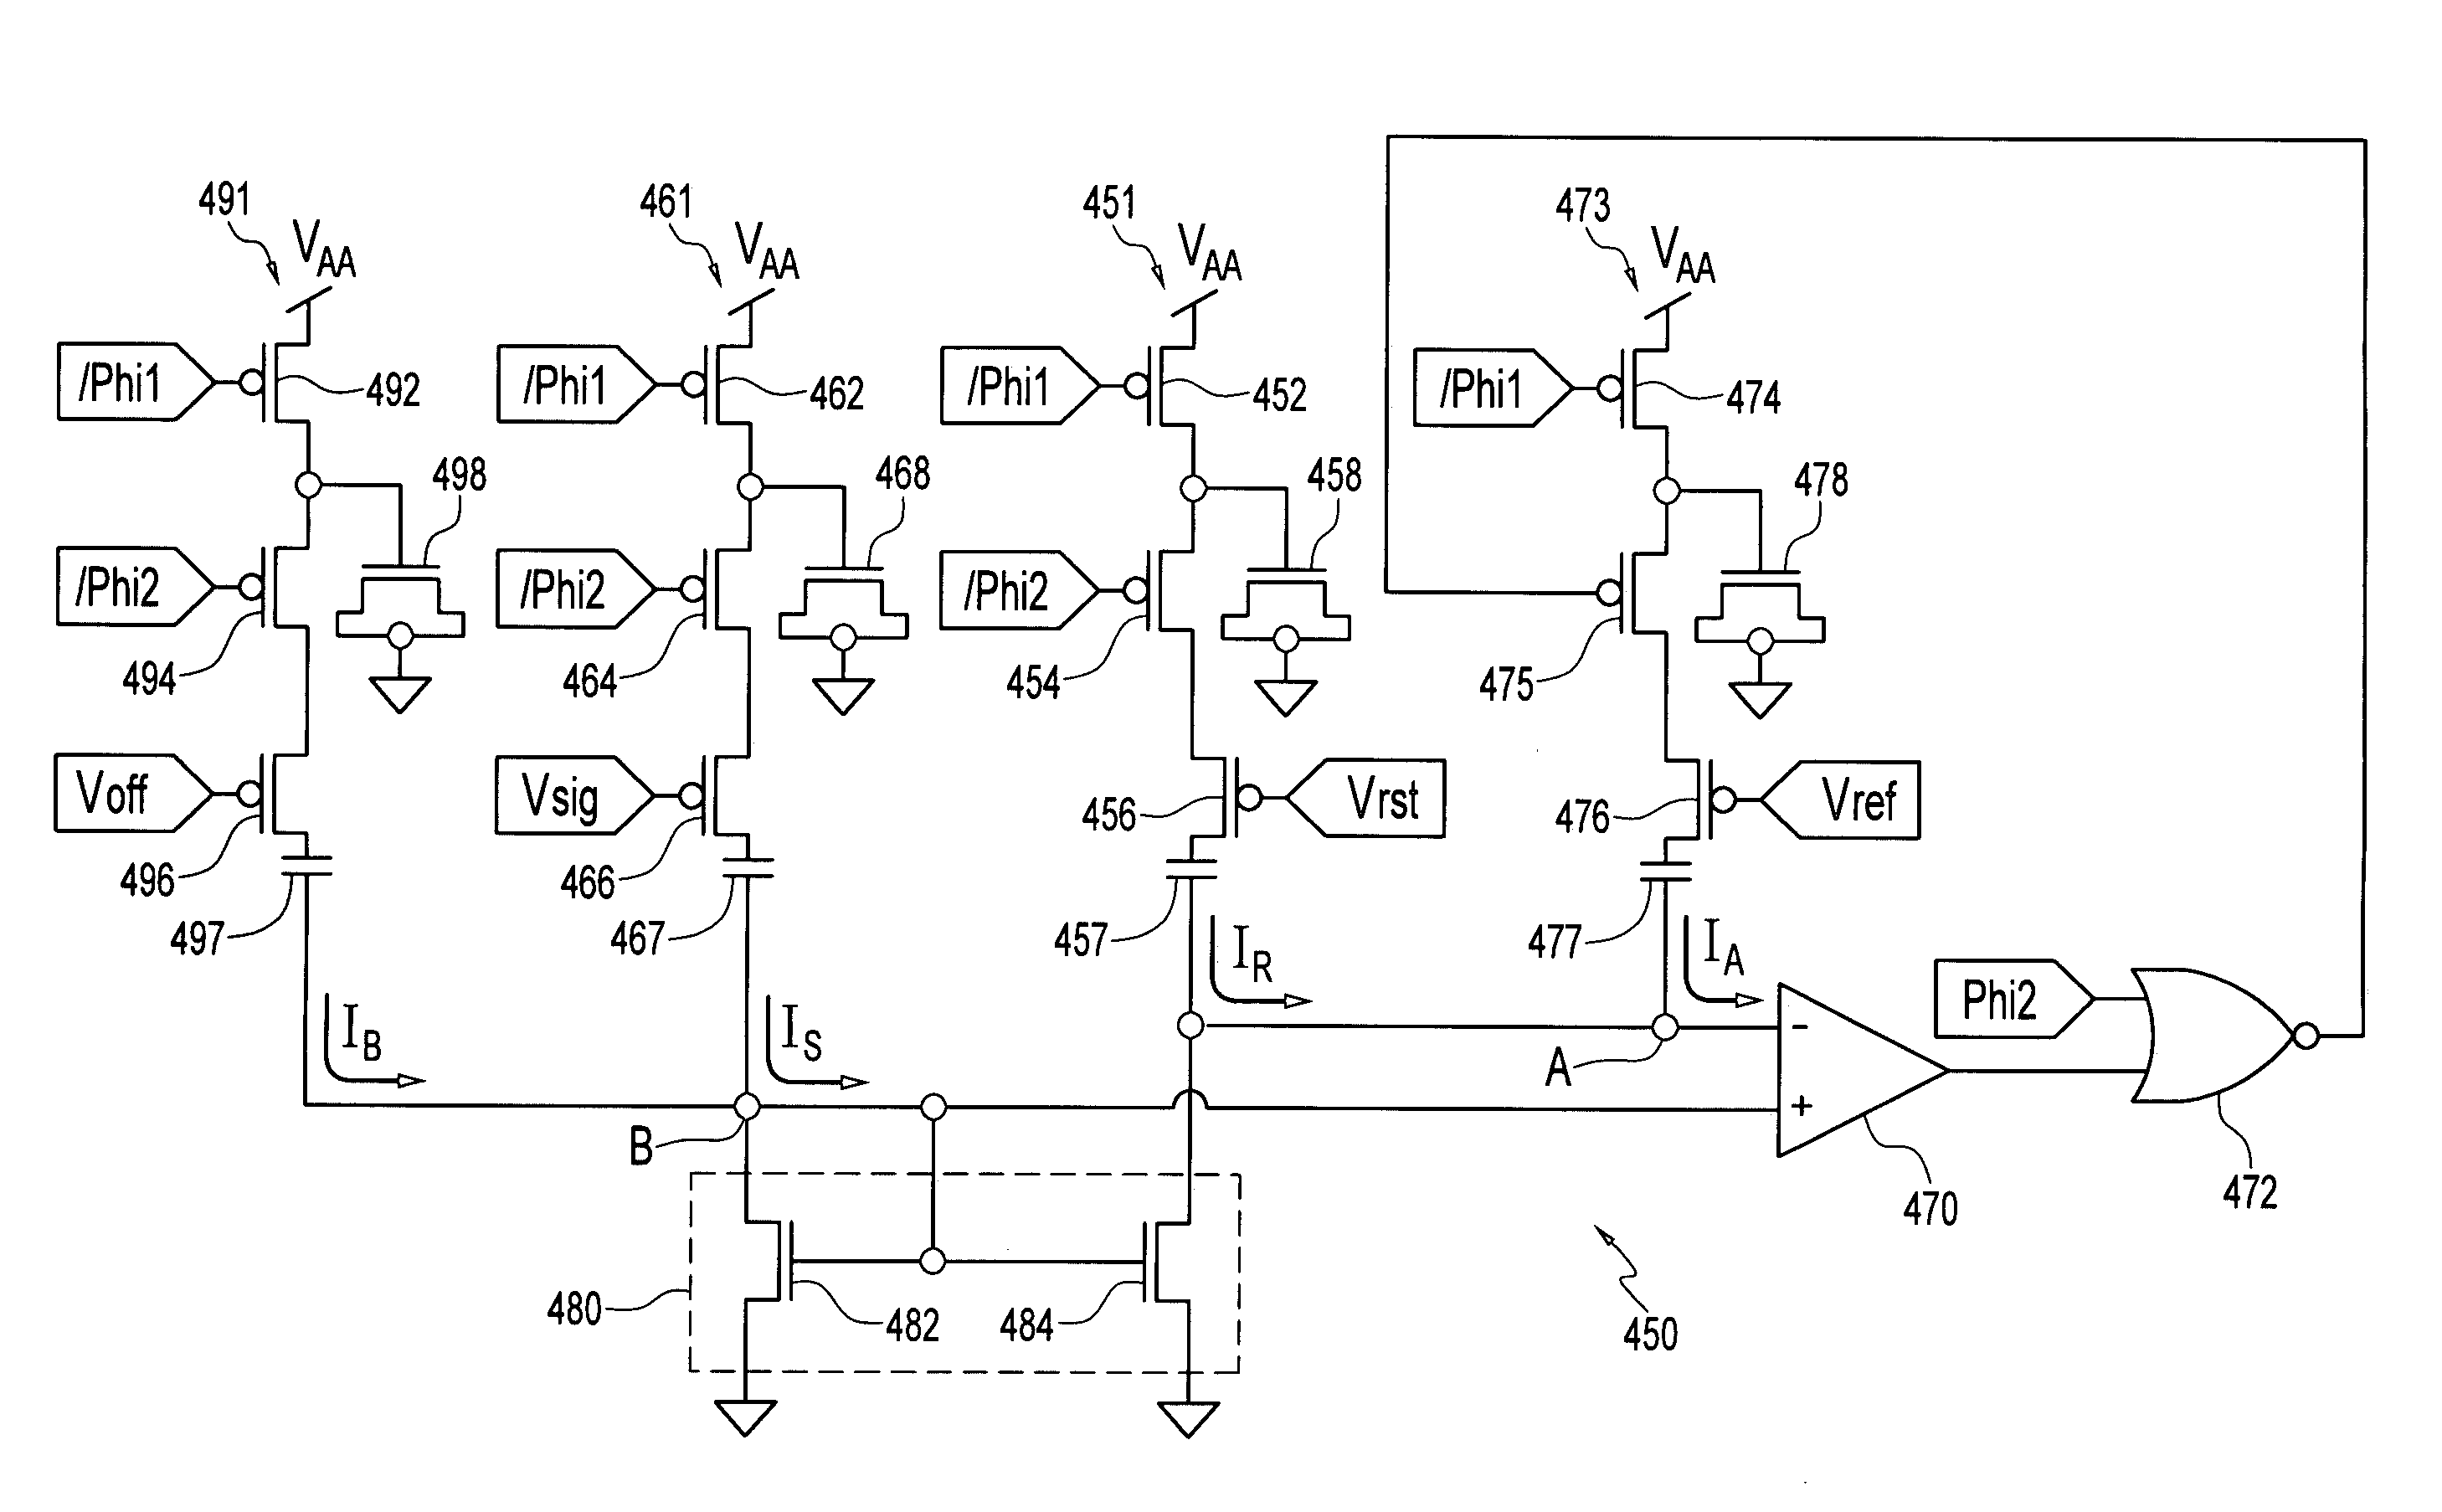 Column-parallel sigma-delta analog-to-digital conversion with gain and offset control